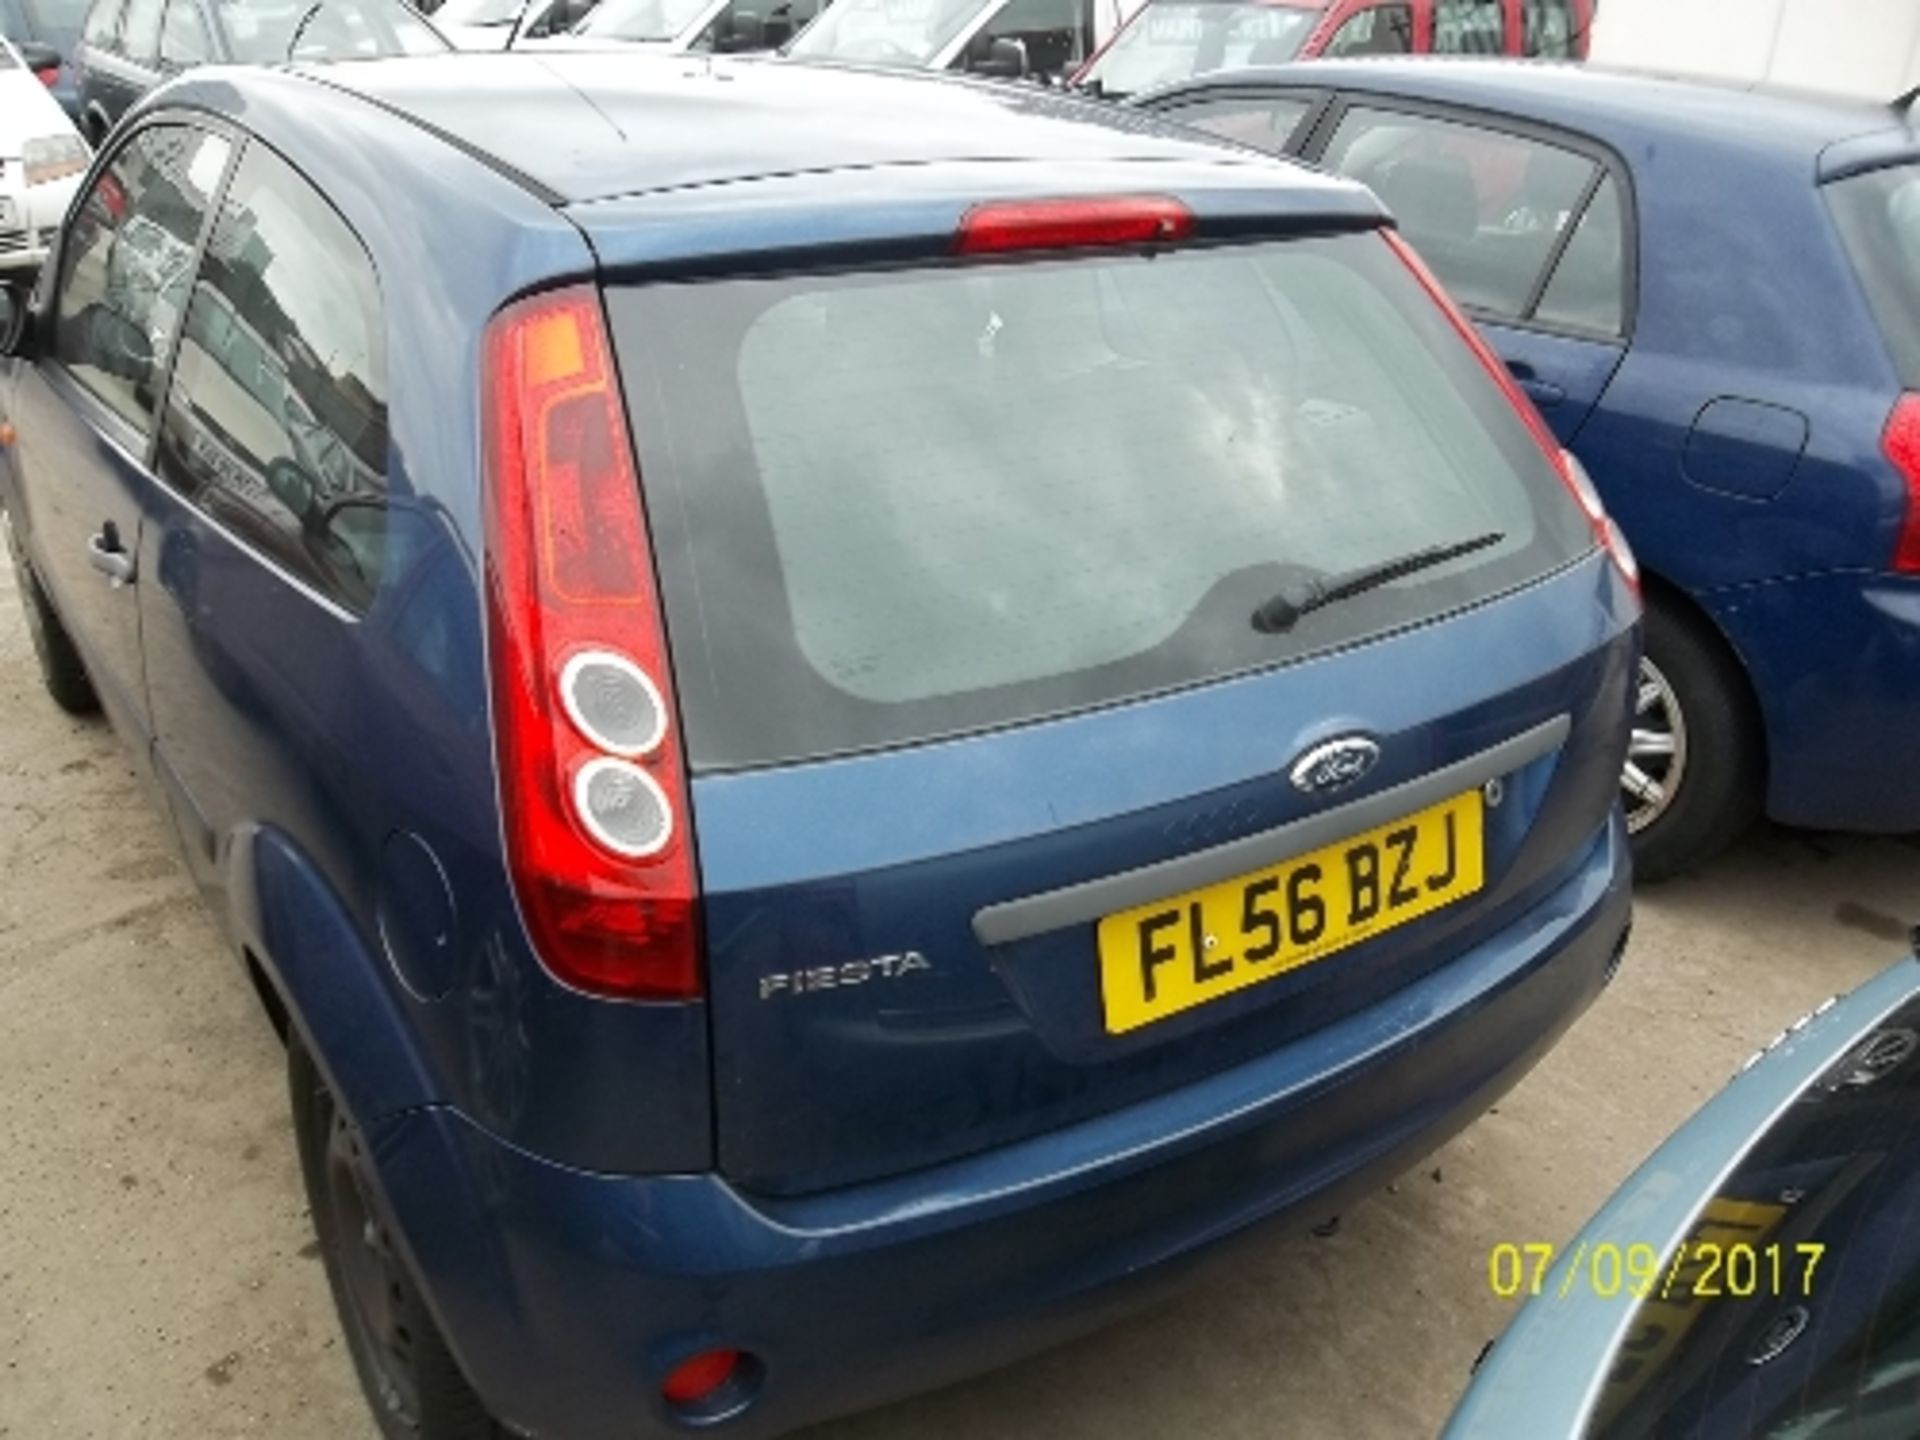 Ford Fiesta Style Climate - FL56 BZJ Date of registration: 18.09.2006 1242cc, petrol, manual, blue - Image 3 of 4